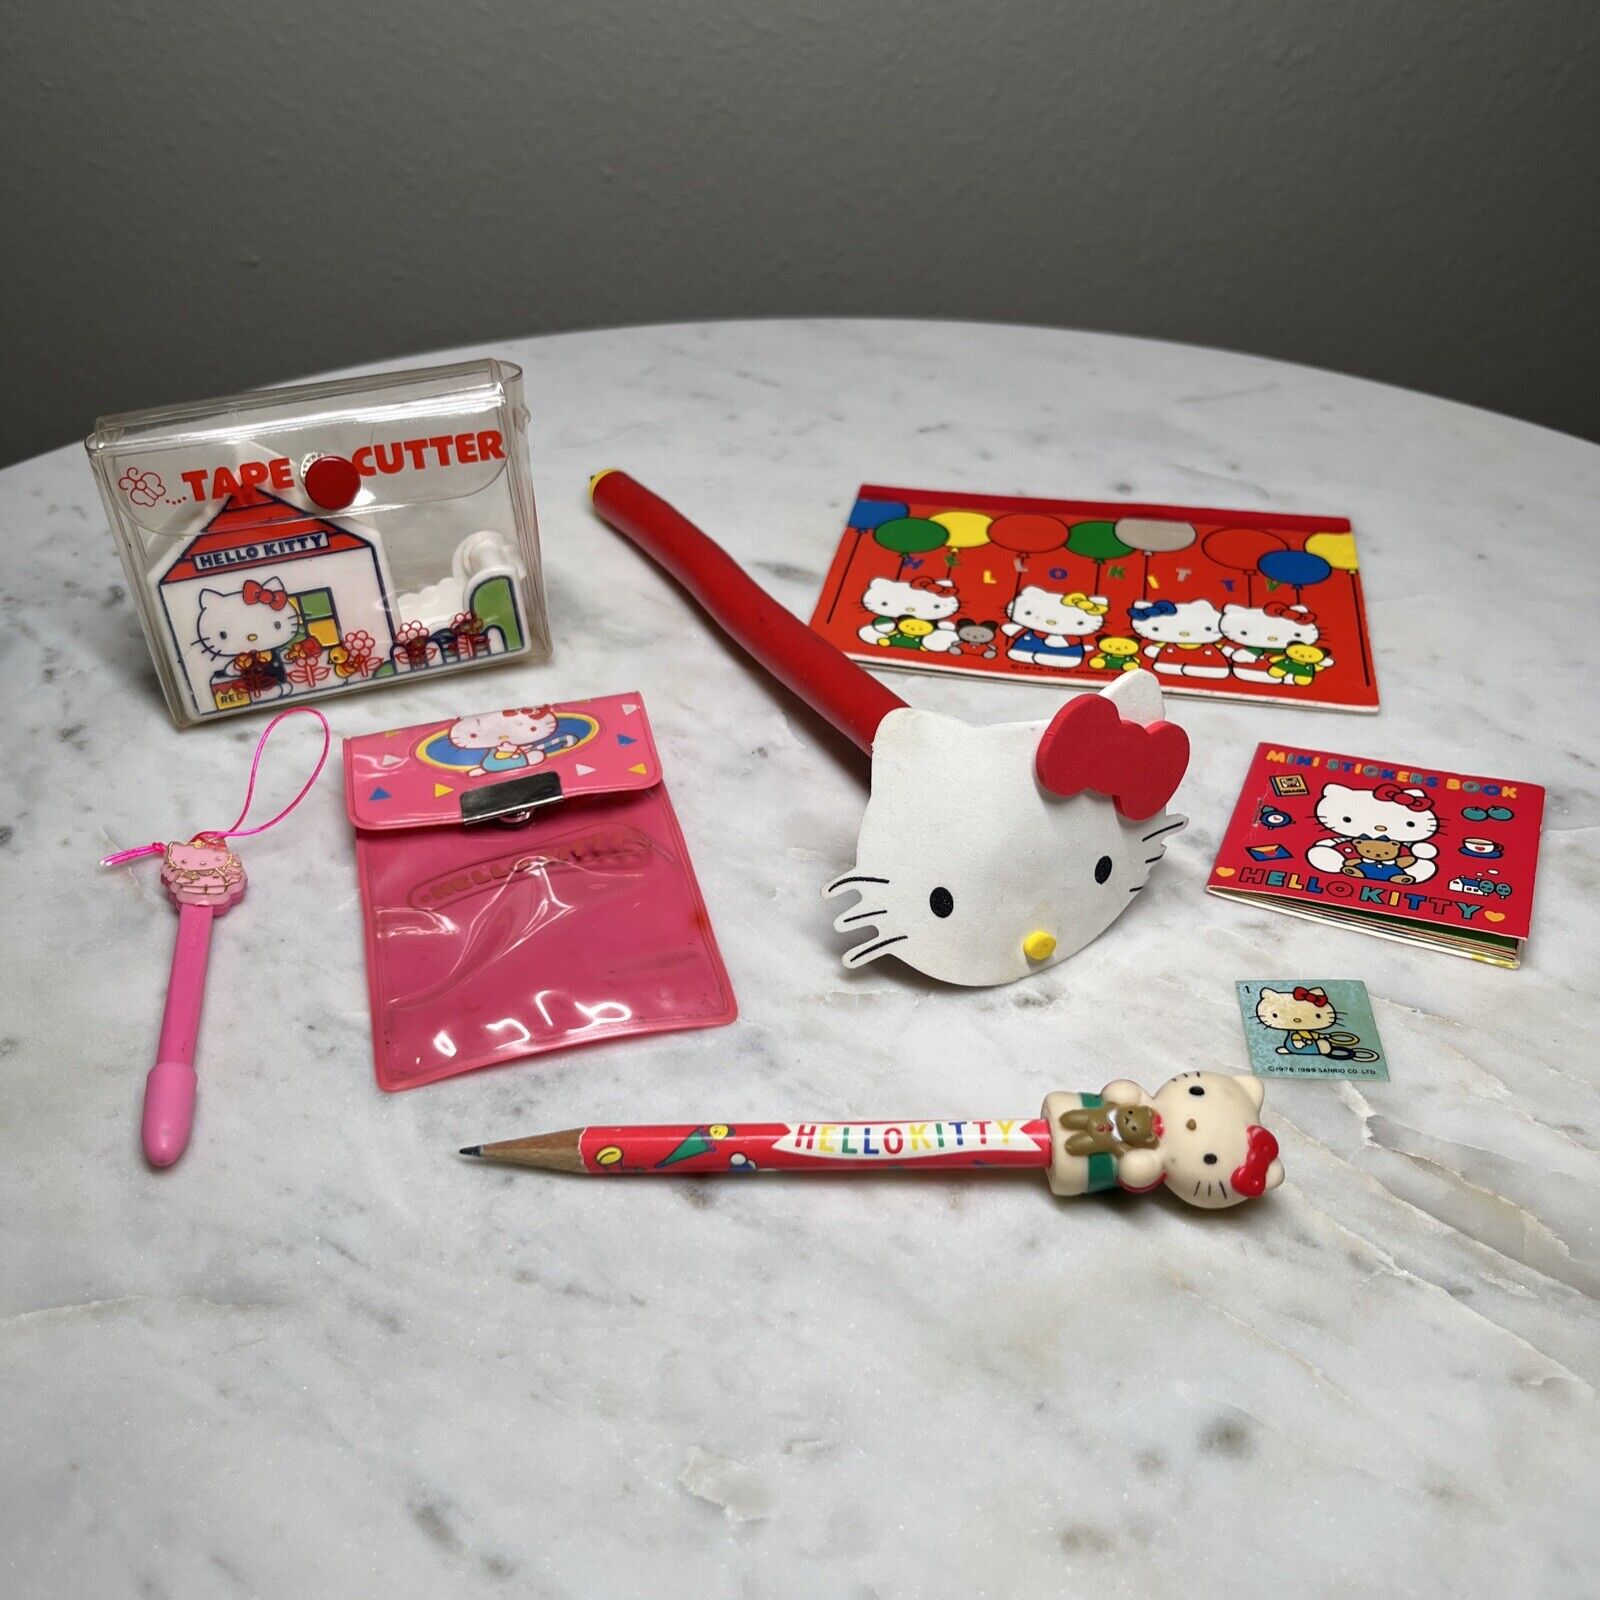 VTG Hello Kitty Stationary Lot~’76 Tape Cutter, Stickers, Pencil Topper, Ink Pen